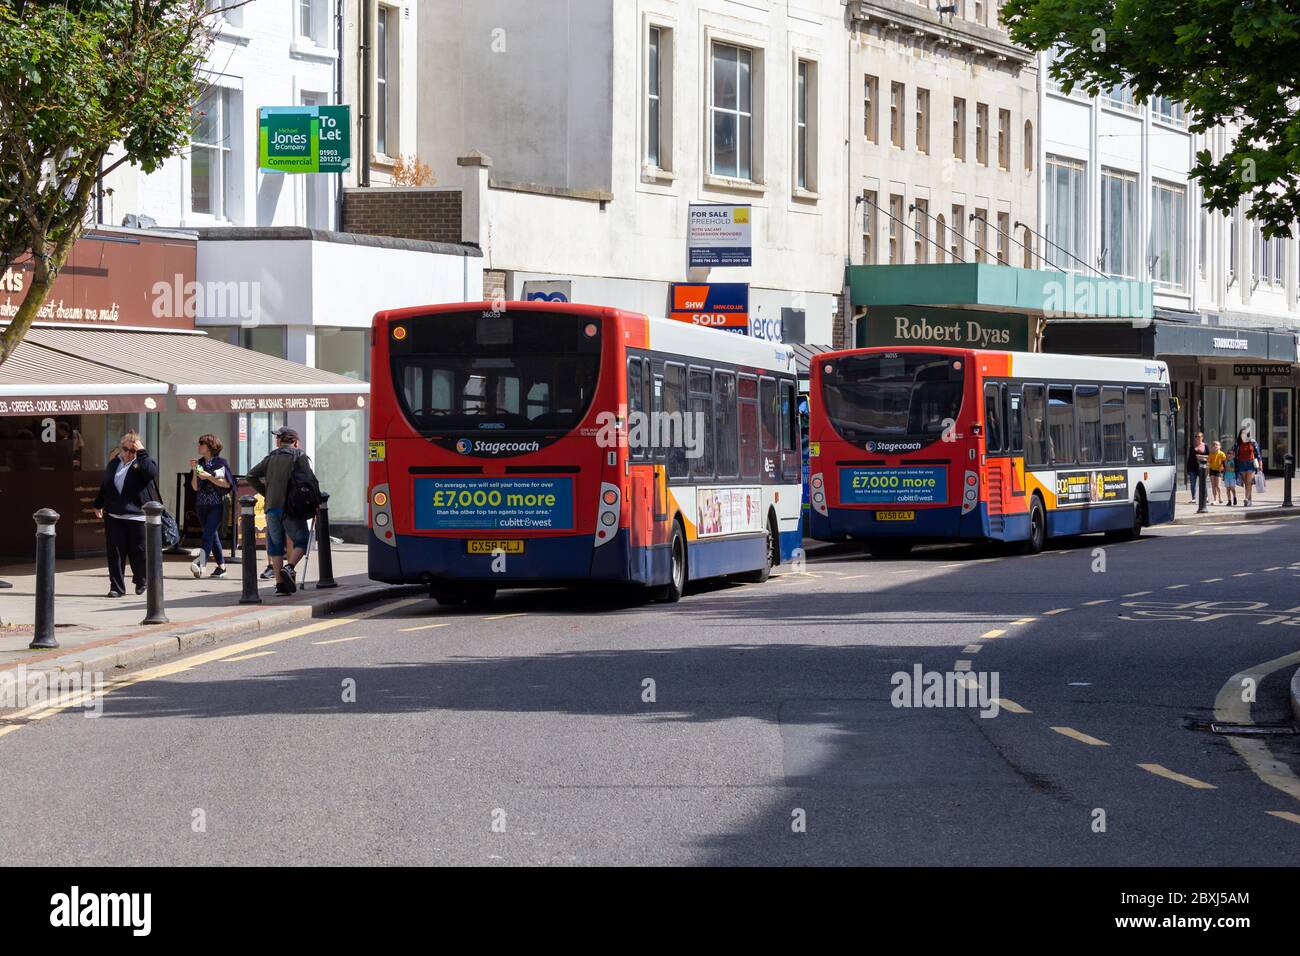 Worthing, Sussex, UK; 7th June 2020; Rear view of Two Buses Parked in a Town Centre Street Stock Photo